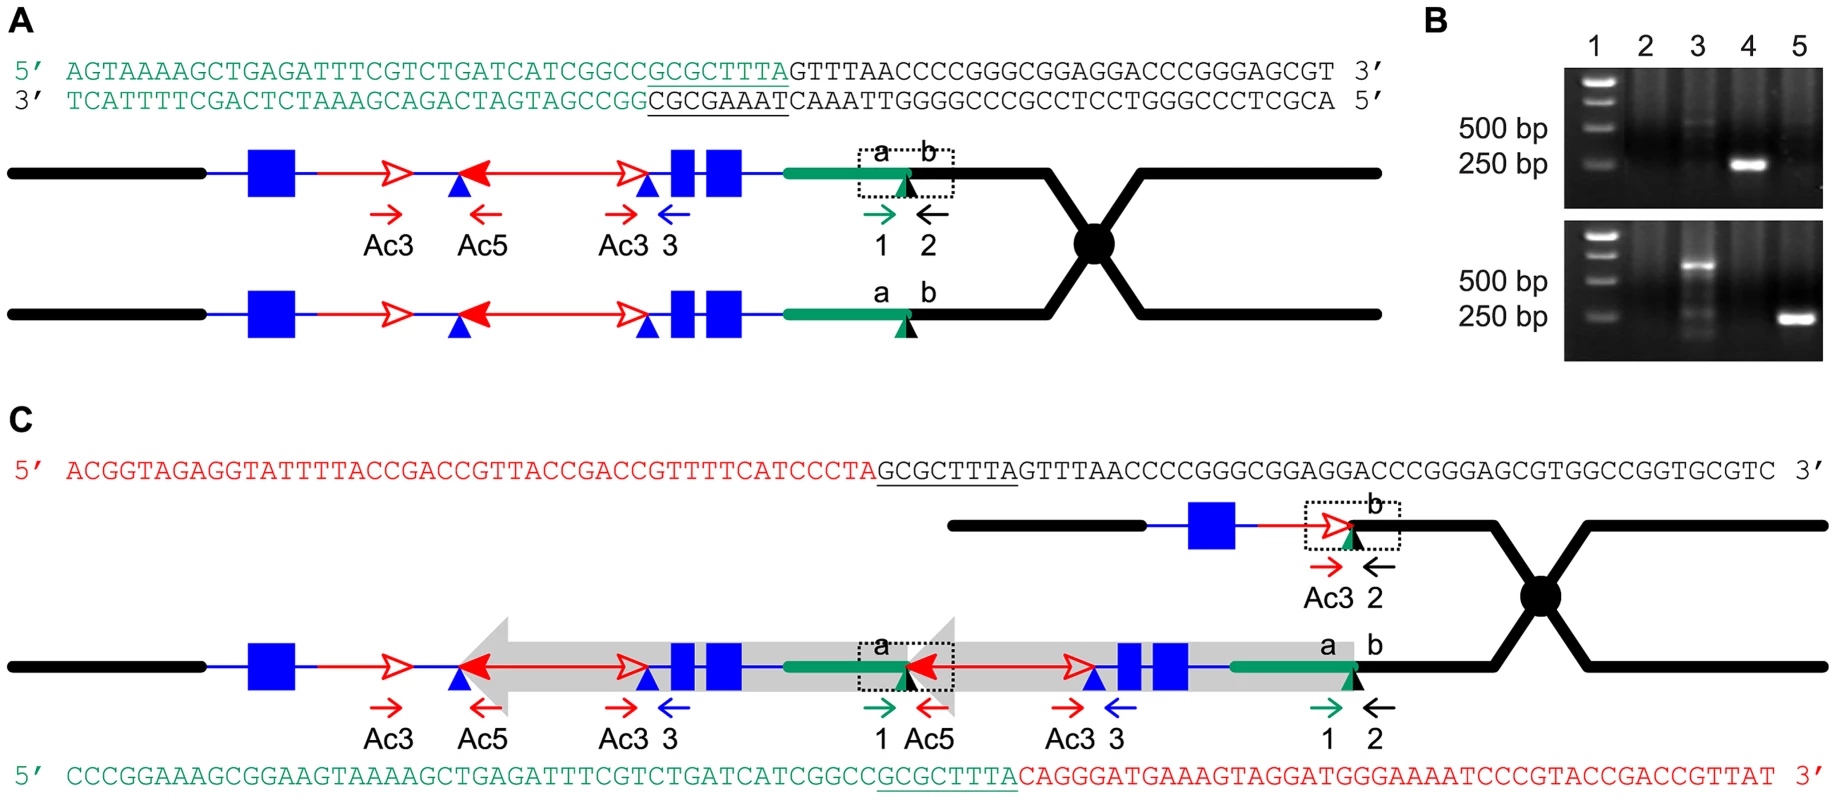 Breakpoint sequences of reciprocal duplication/deletion alleles <i>P1-rr-T1</i> and <i>p1-ww-T1</i> generated by Reversed Ends Transposition.